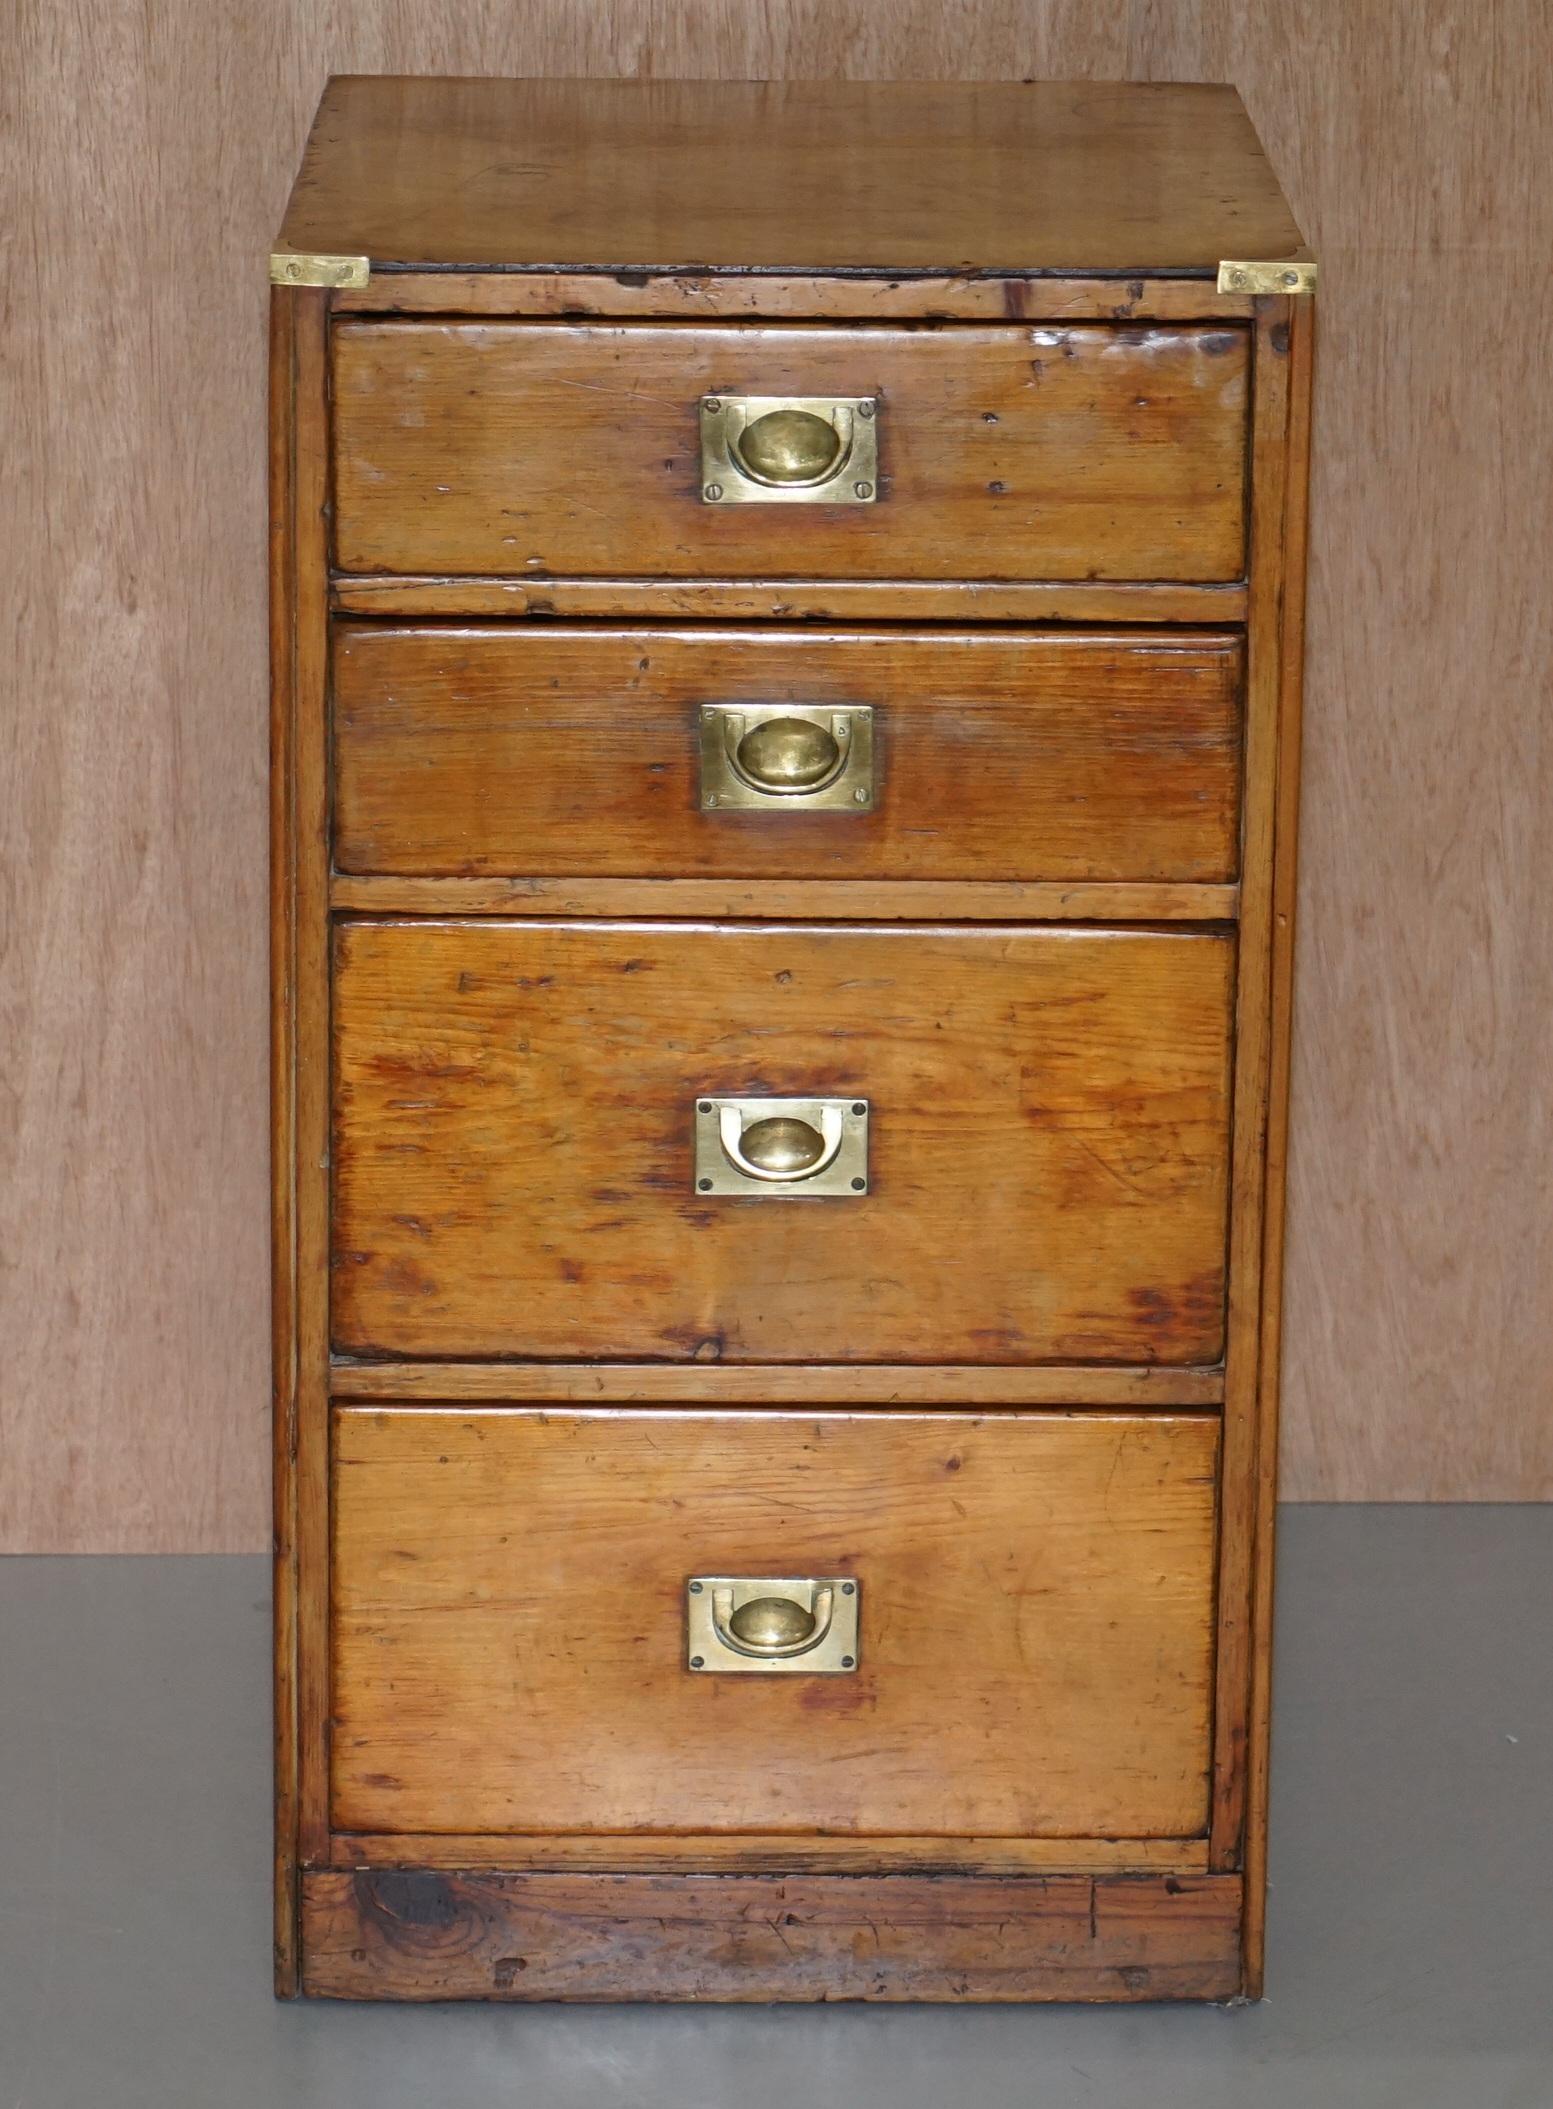 We are delighted to offer for sale this lovely solid English oak military campaign style chest of drawers

A good looking and well made chest, it’s very utilitarian, it would suit pretty much any location and would work in any setting

These are